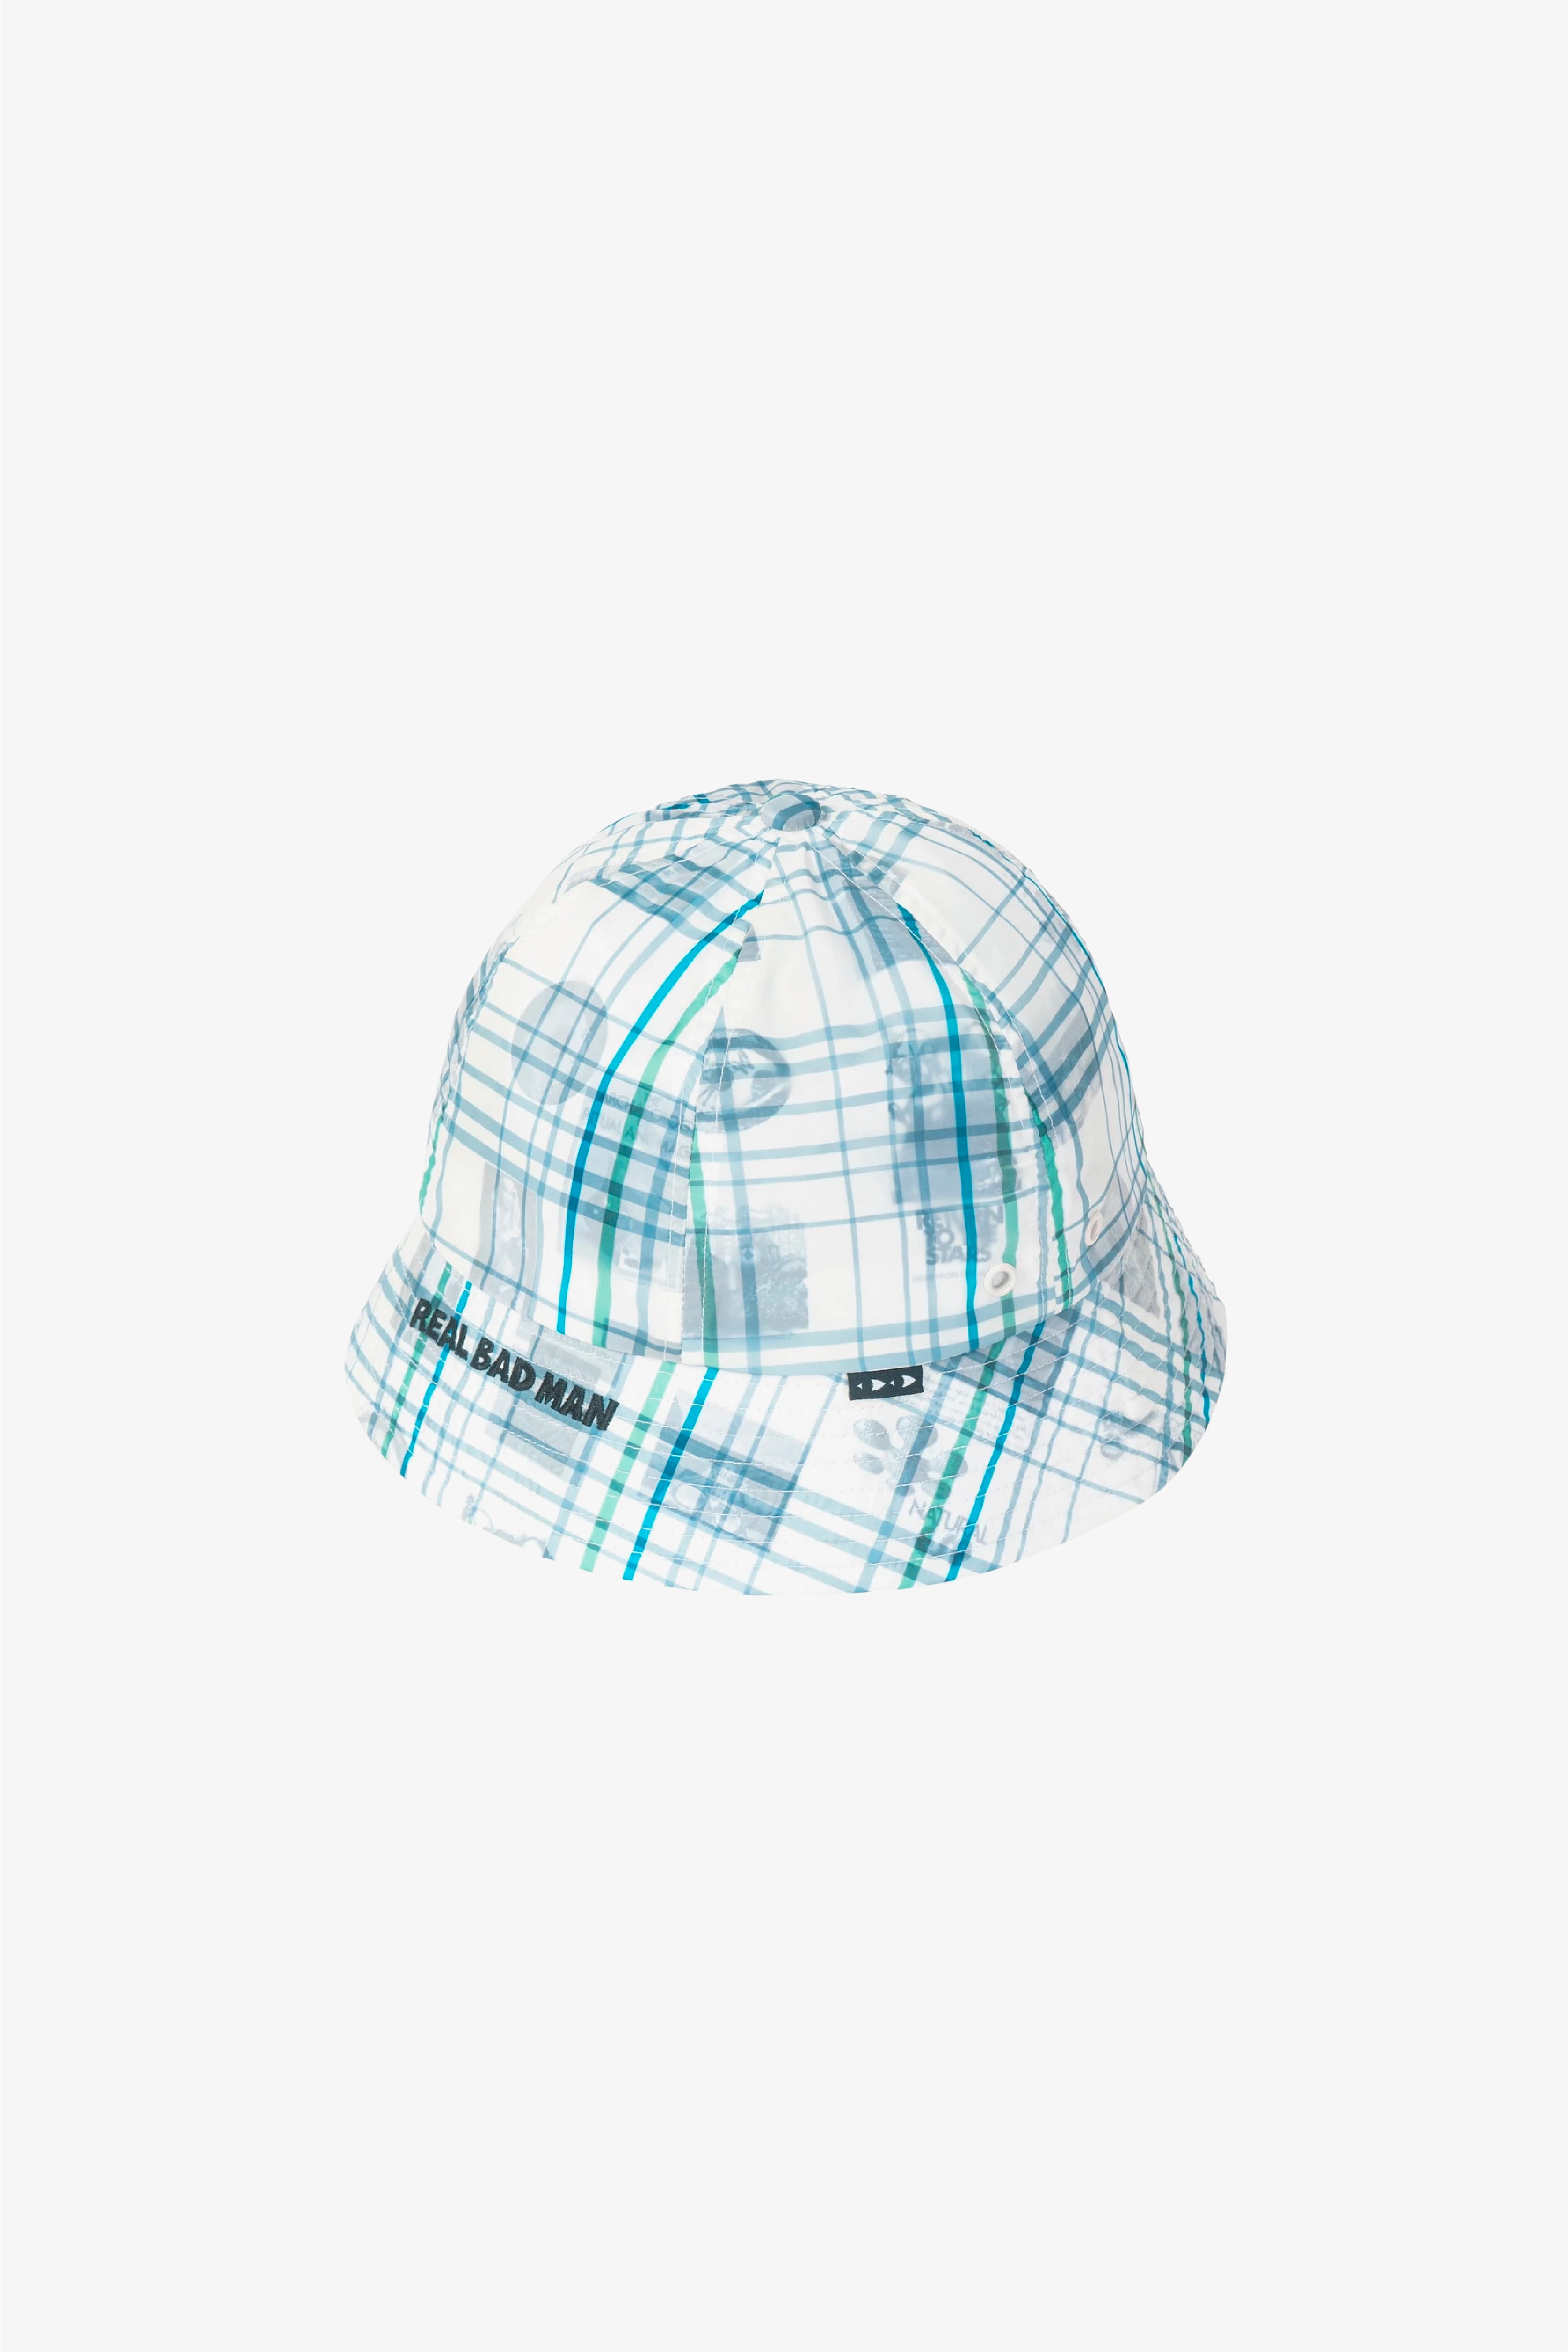 Selectshop FRAME - REAL BAD MAN Double Vision Bucket Hat All-Accessories Dubai